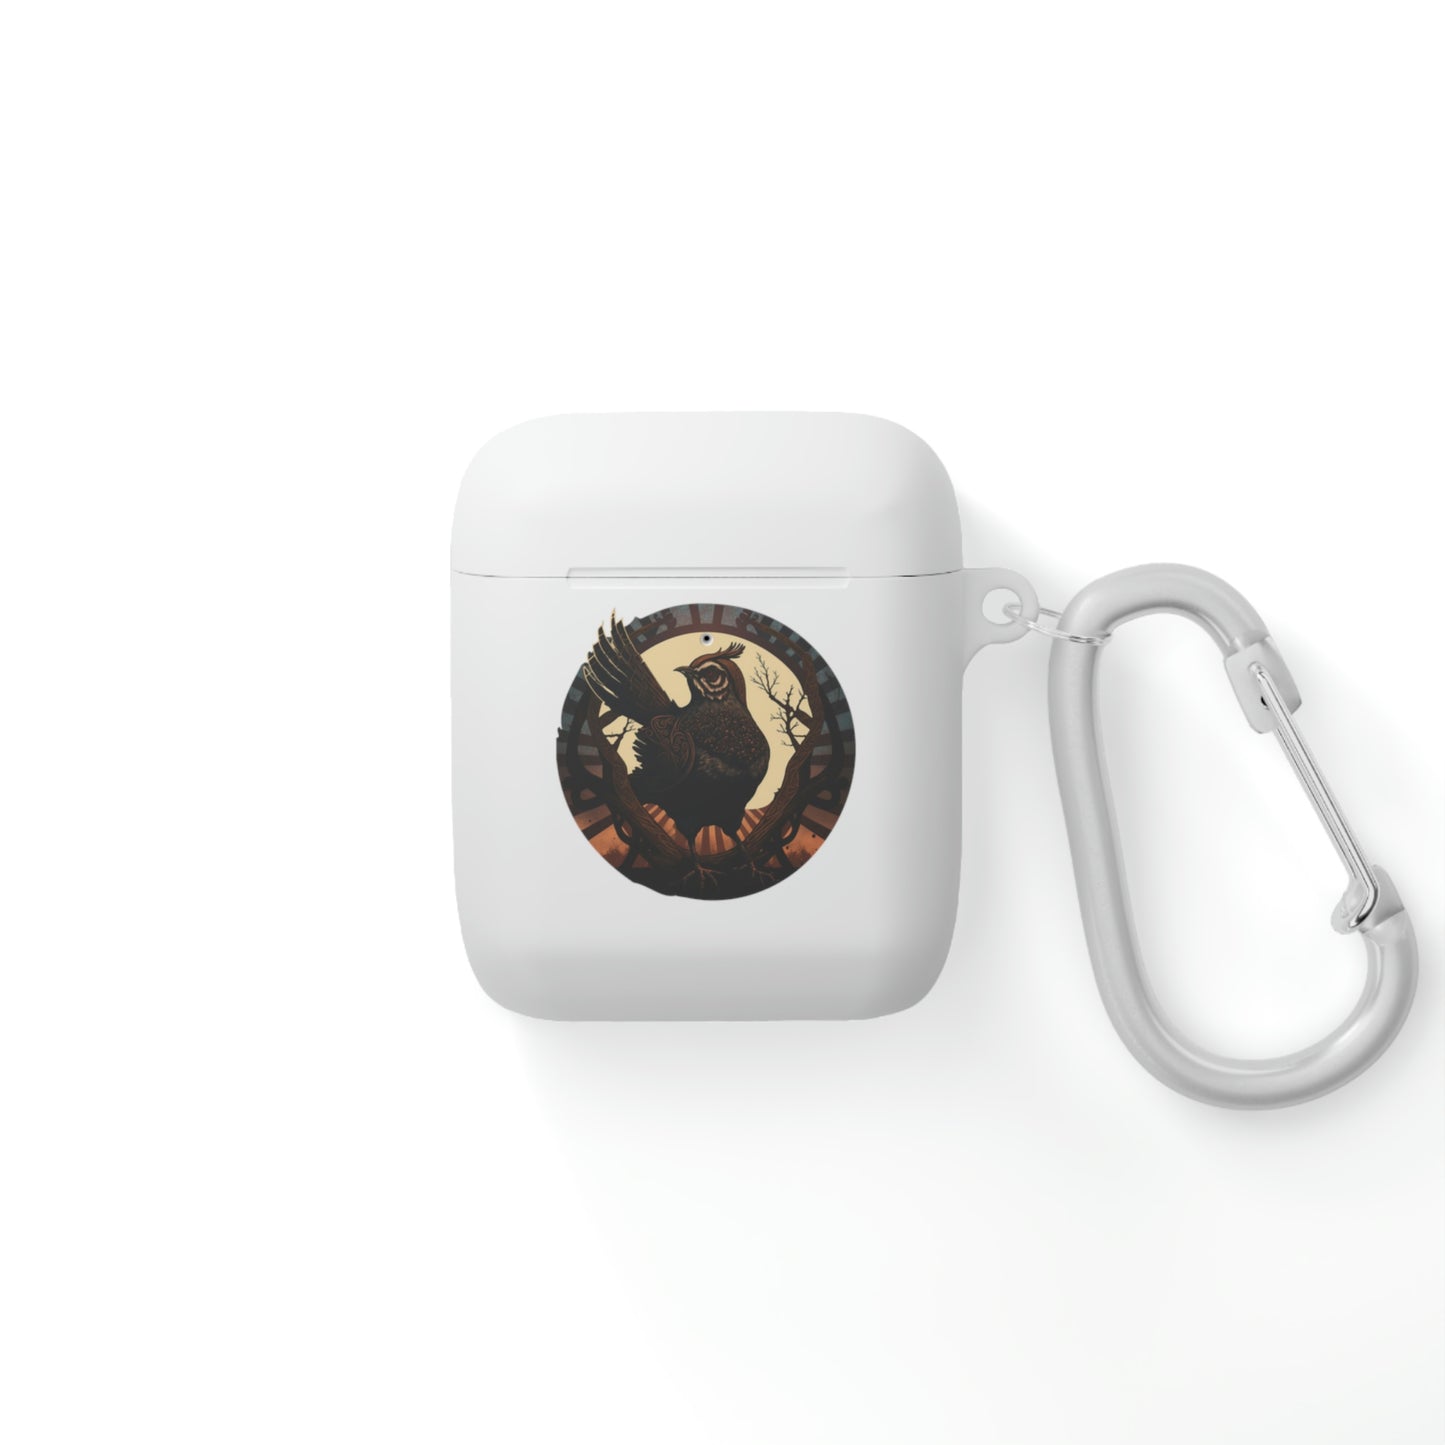 AirPods and AirPods Pro Case Cover - Quail Keeping is Metal